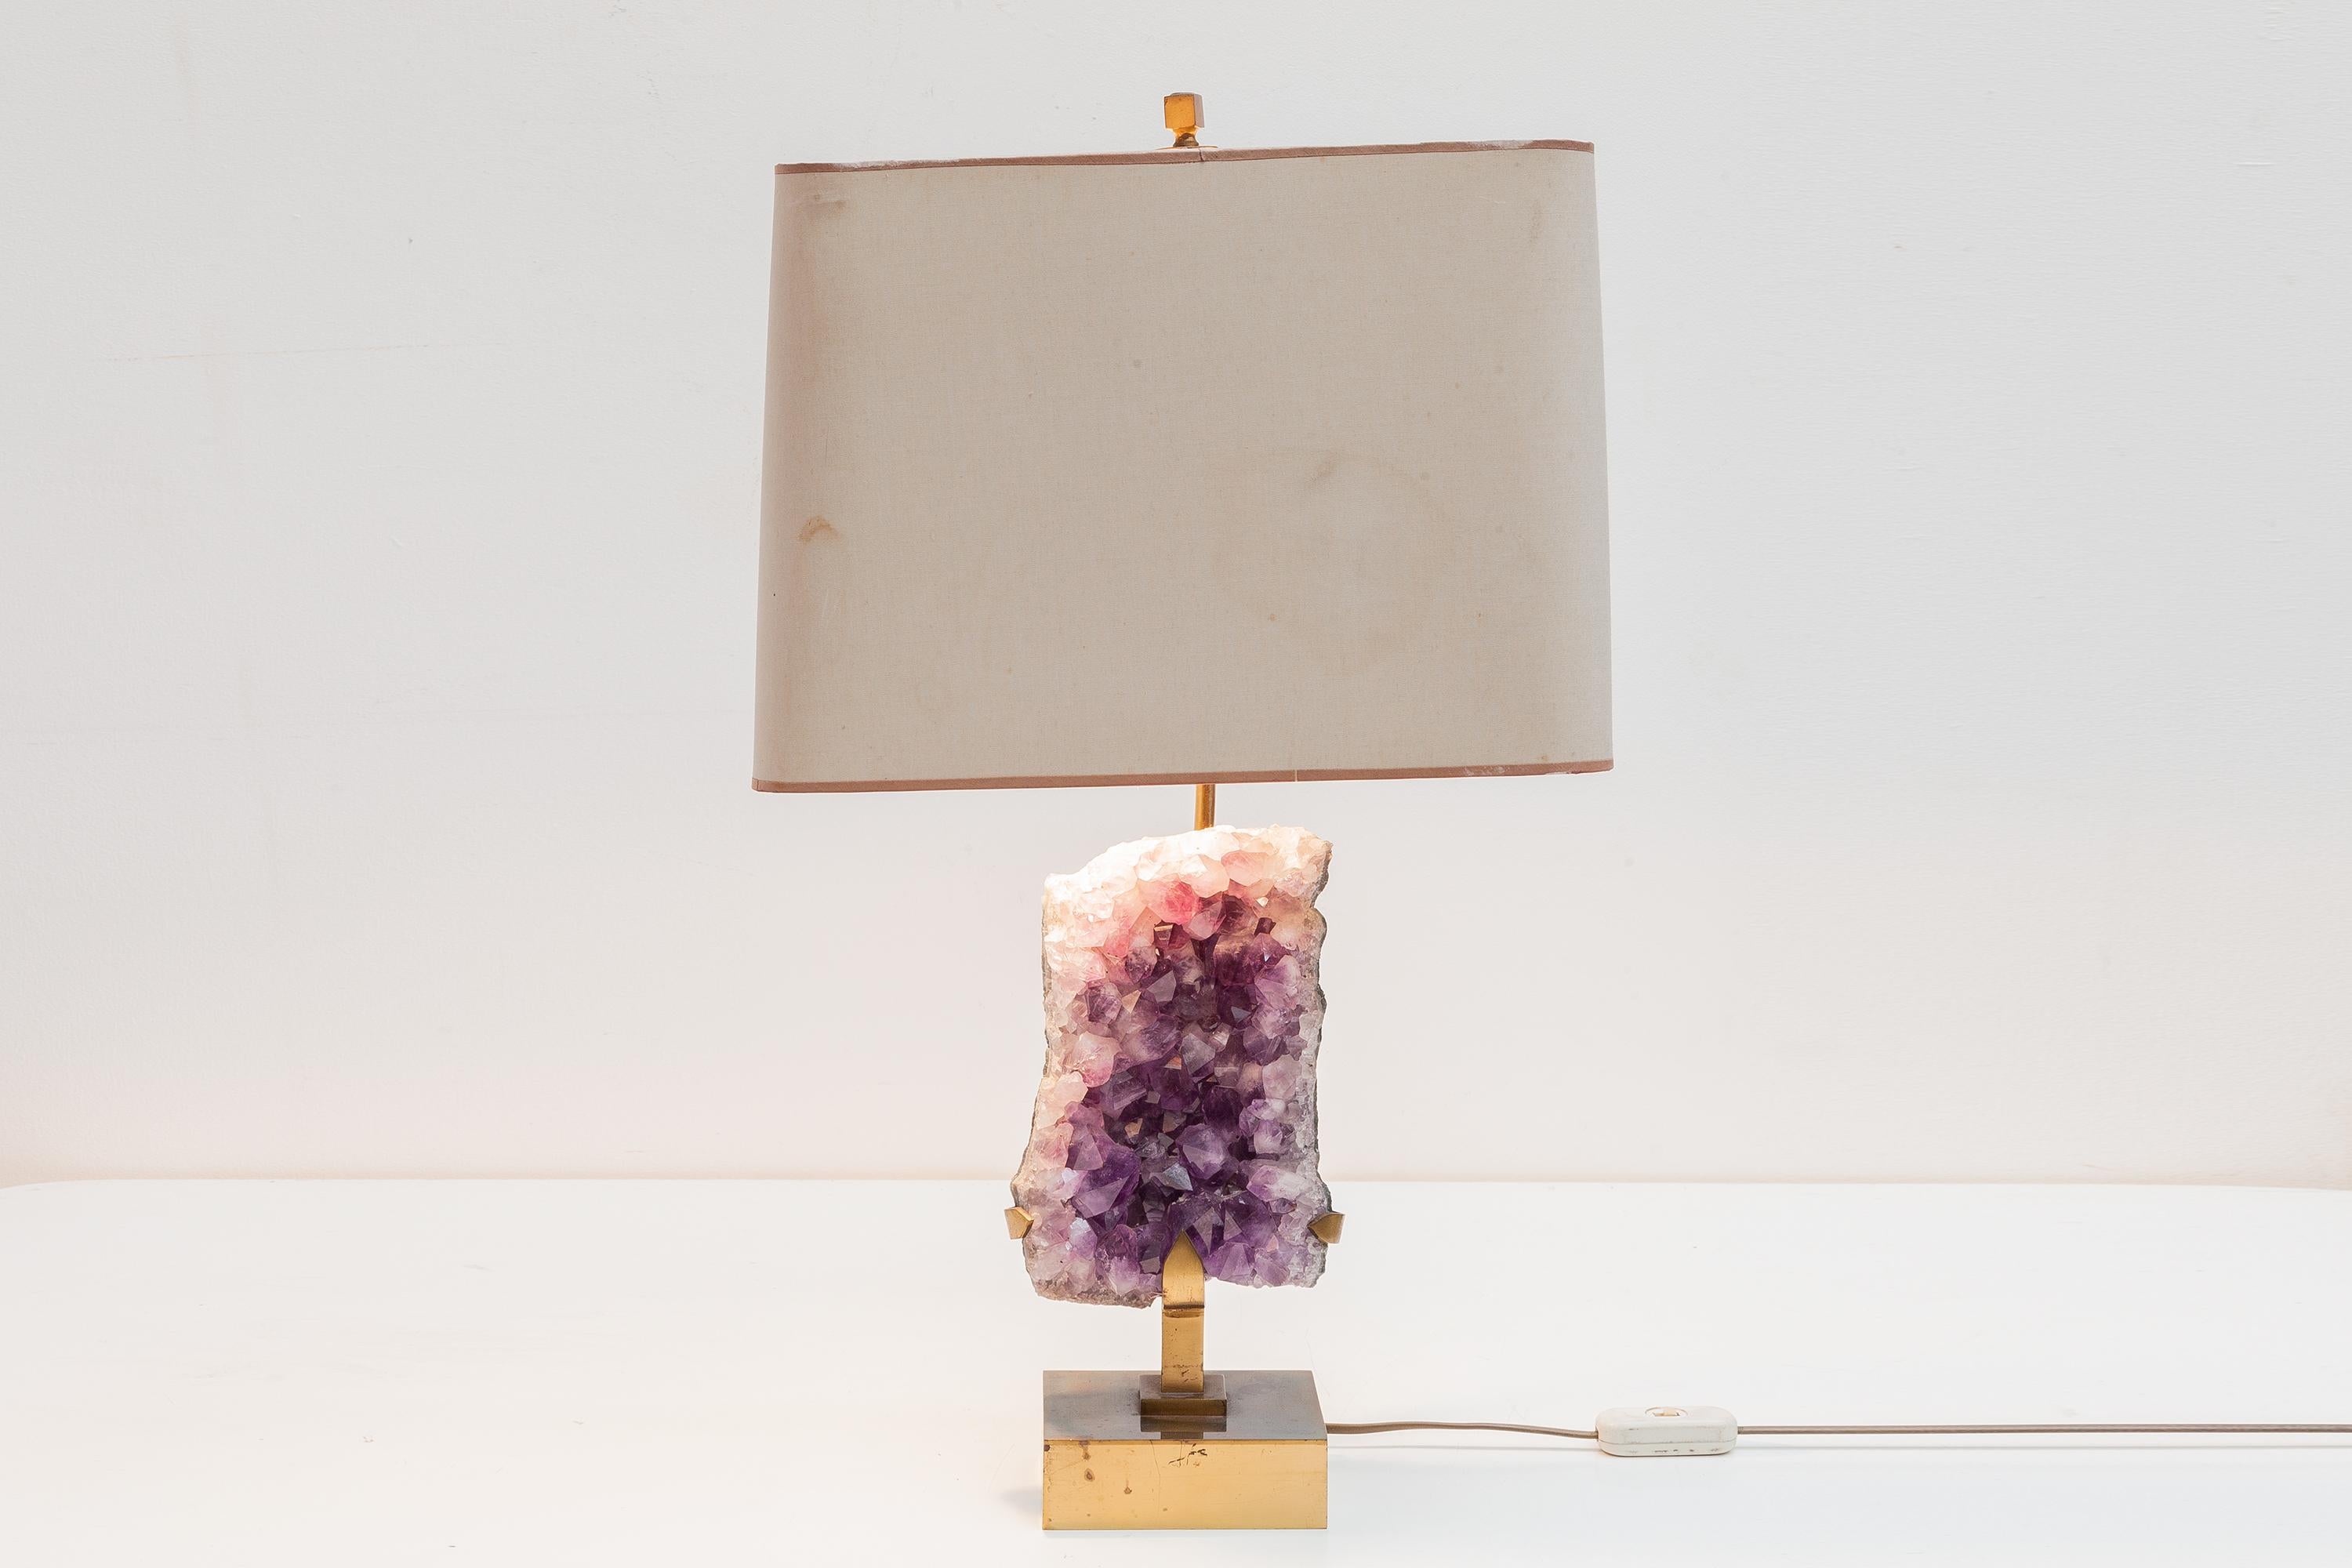 This vintage amethyst table lamp is designed by Willy Daro. Willy Daro was famous for creating and designing spectacular table lamps made of precious bronze, brass and natural stone elements.

The base is polished brass on which is mounted a large